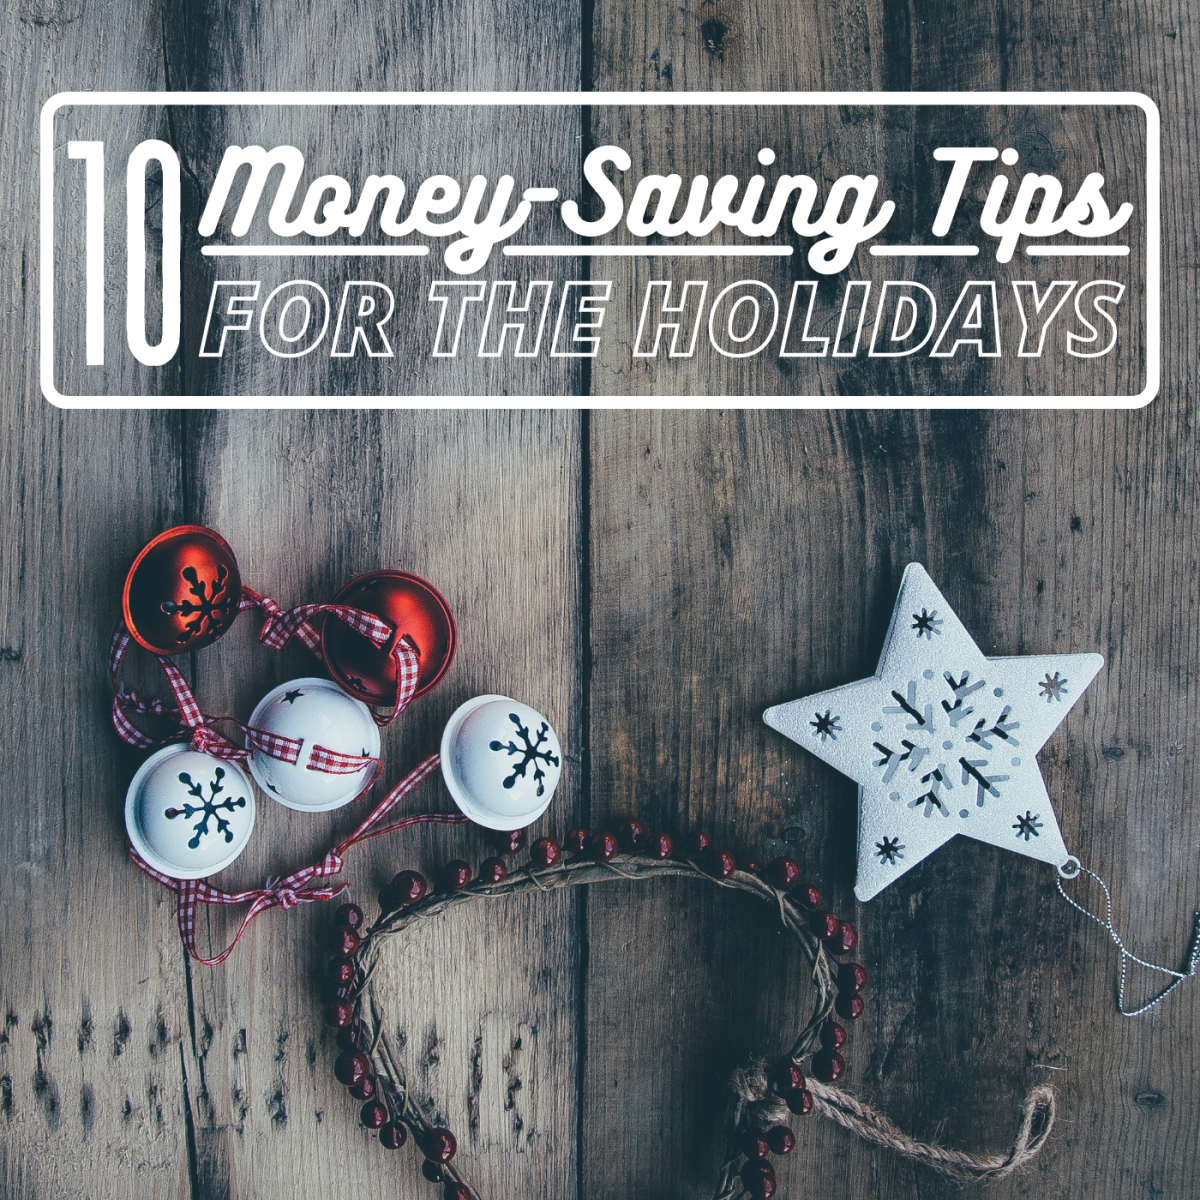 10 Ways to Save Money on Your Christmas Expenses